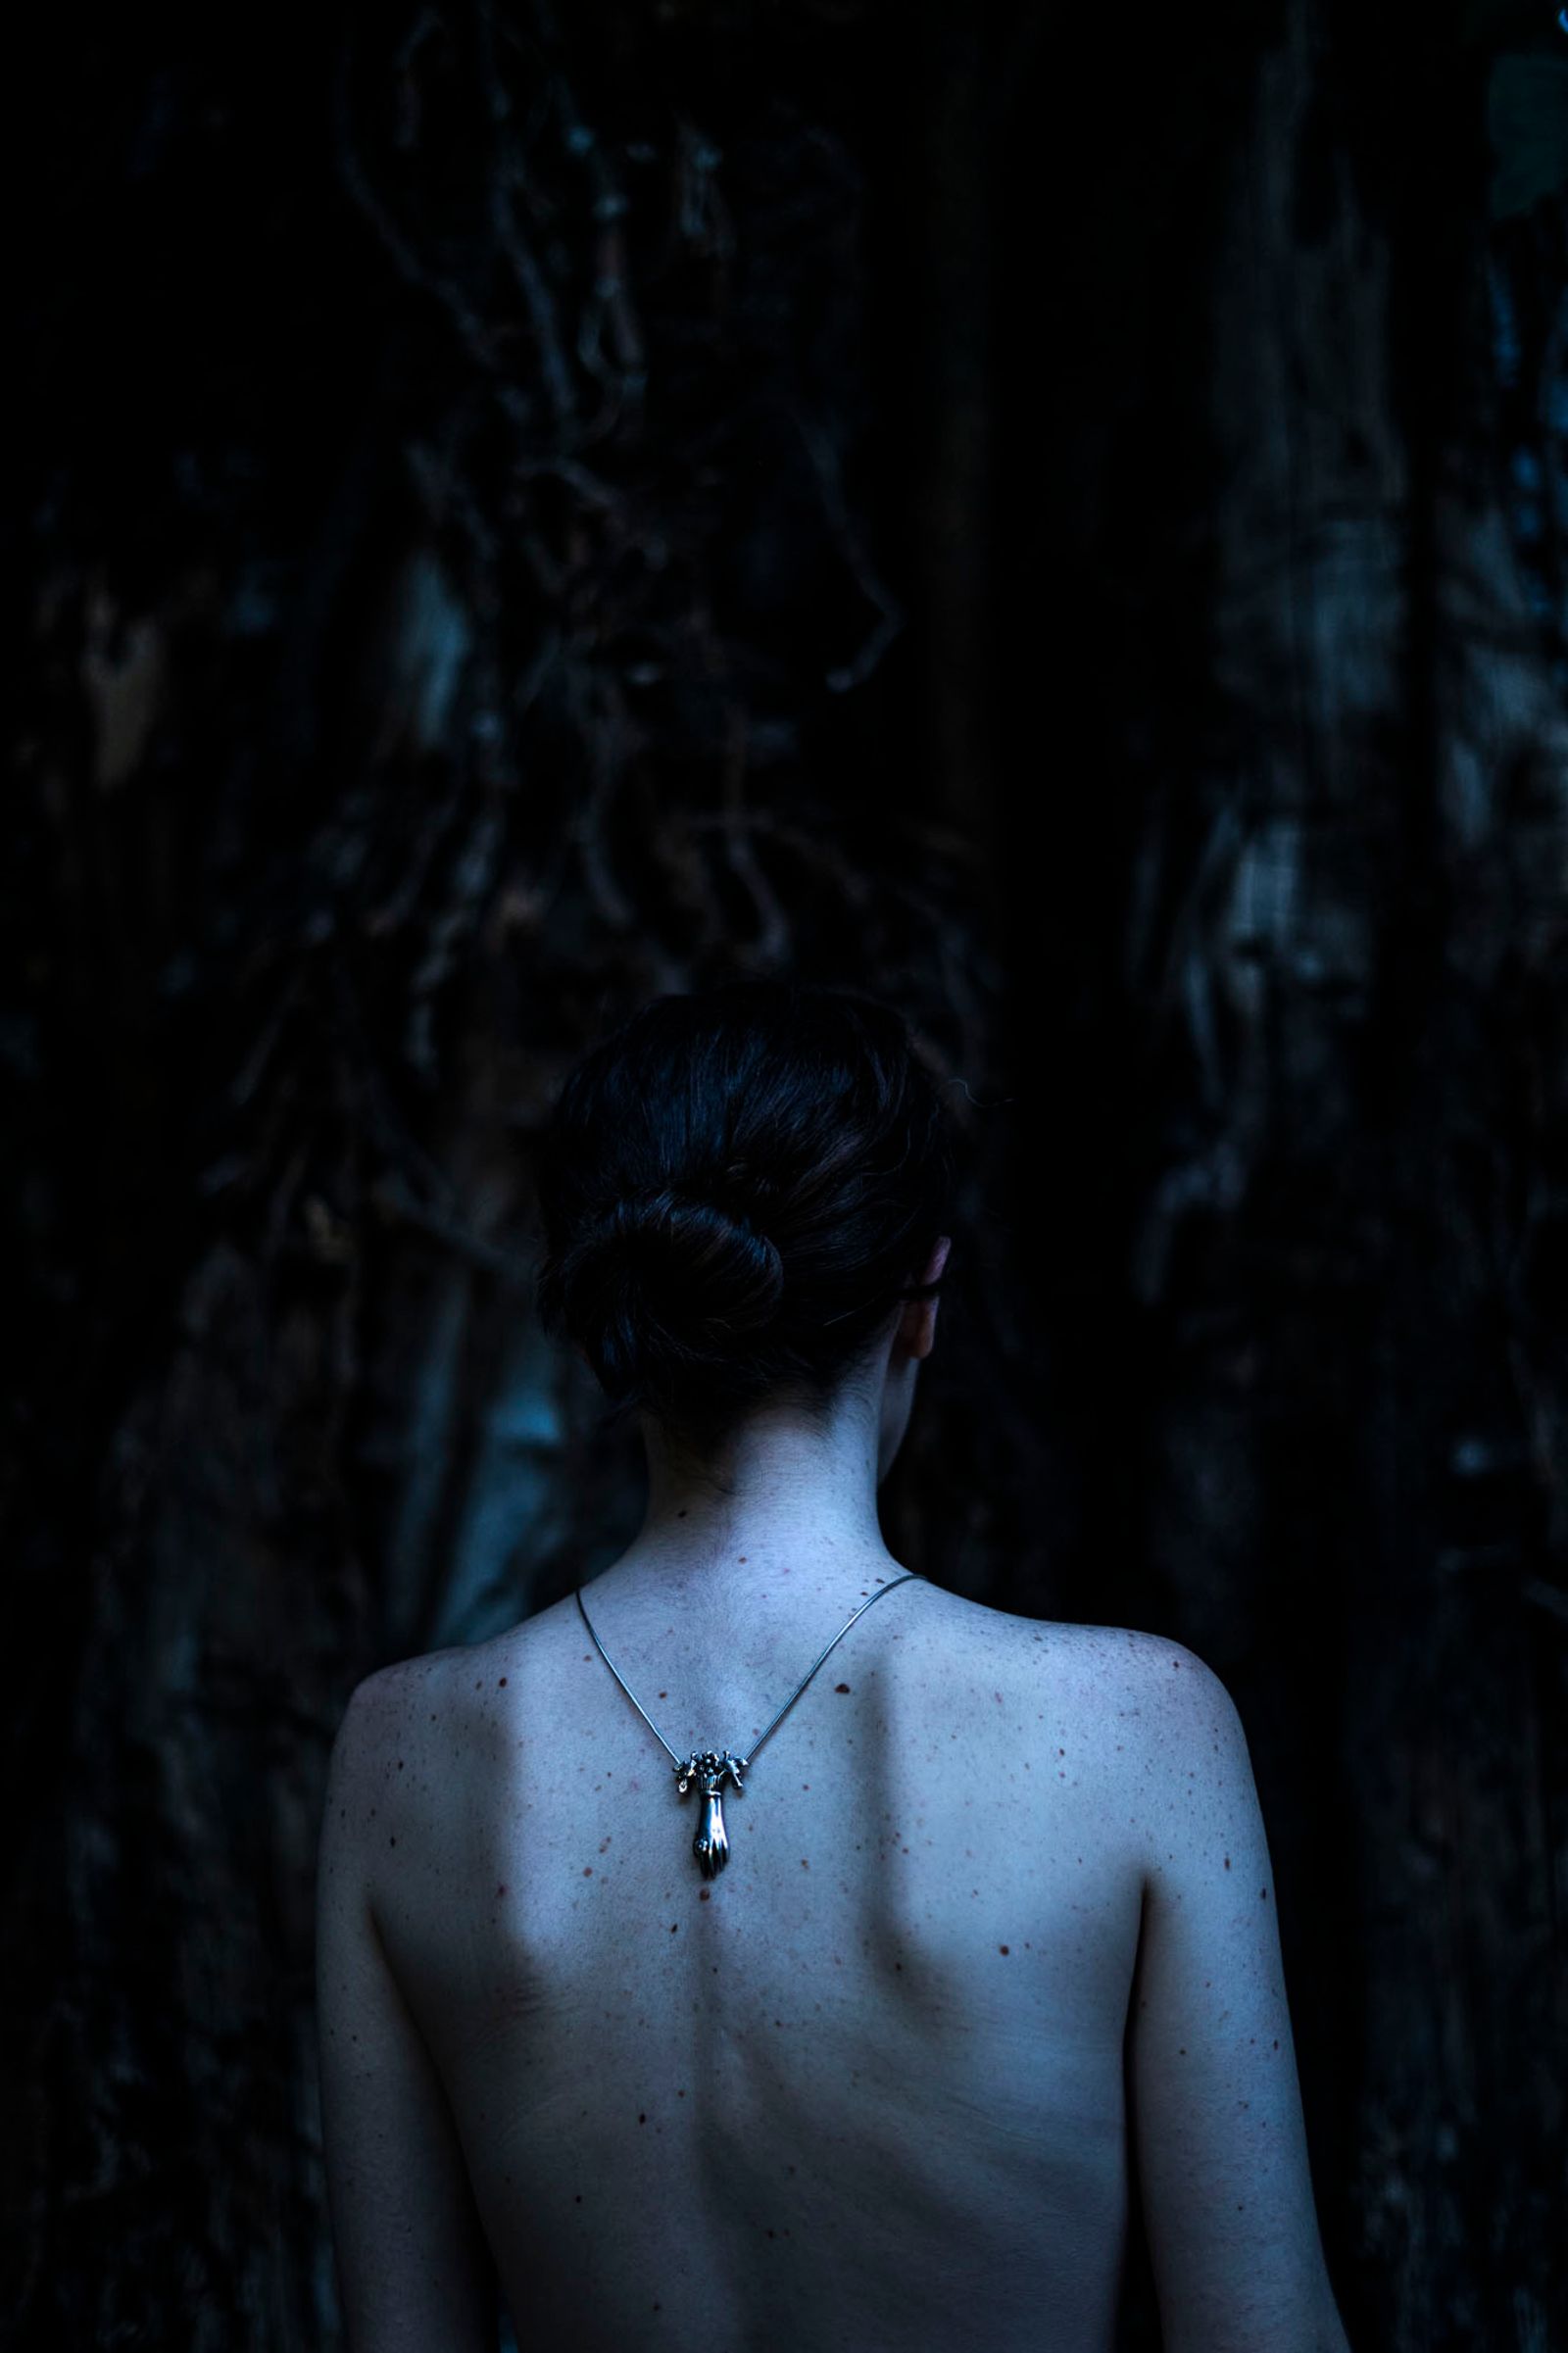 © Valeria Arendar - Image from the Two Times Mary photography project